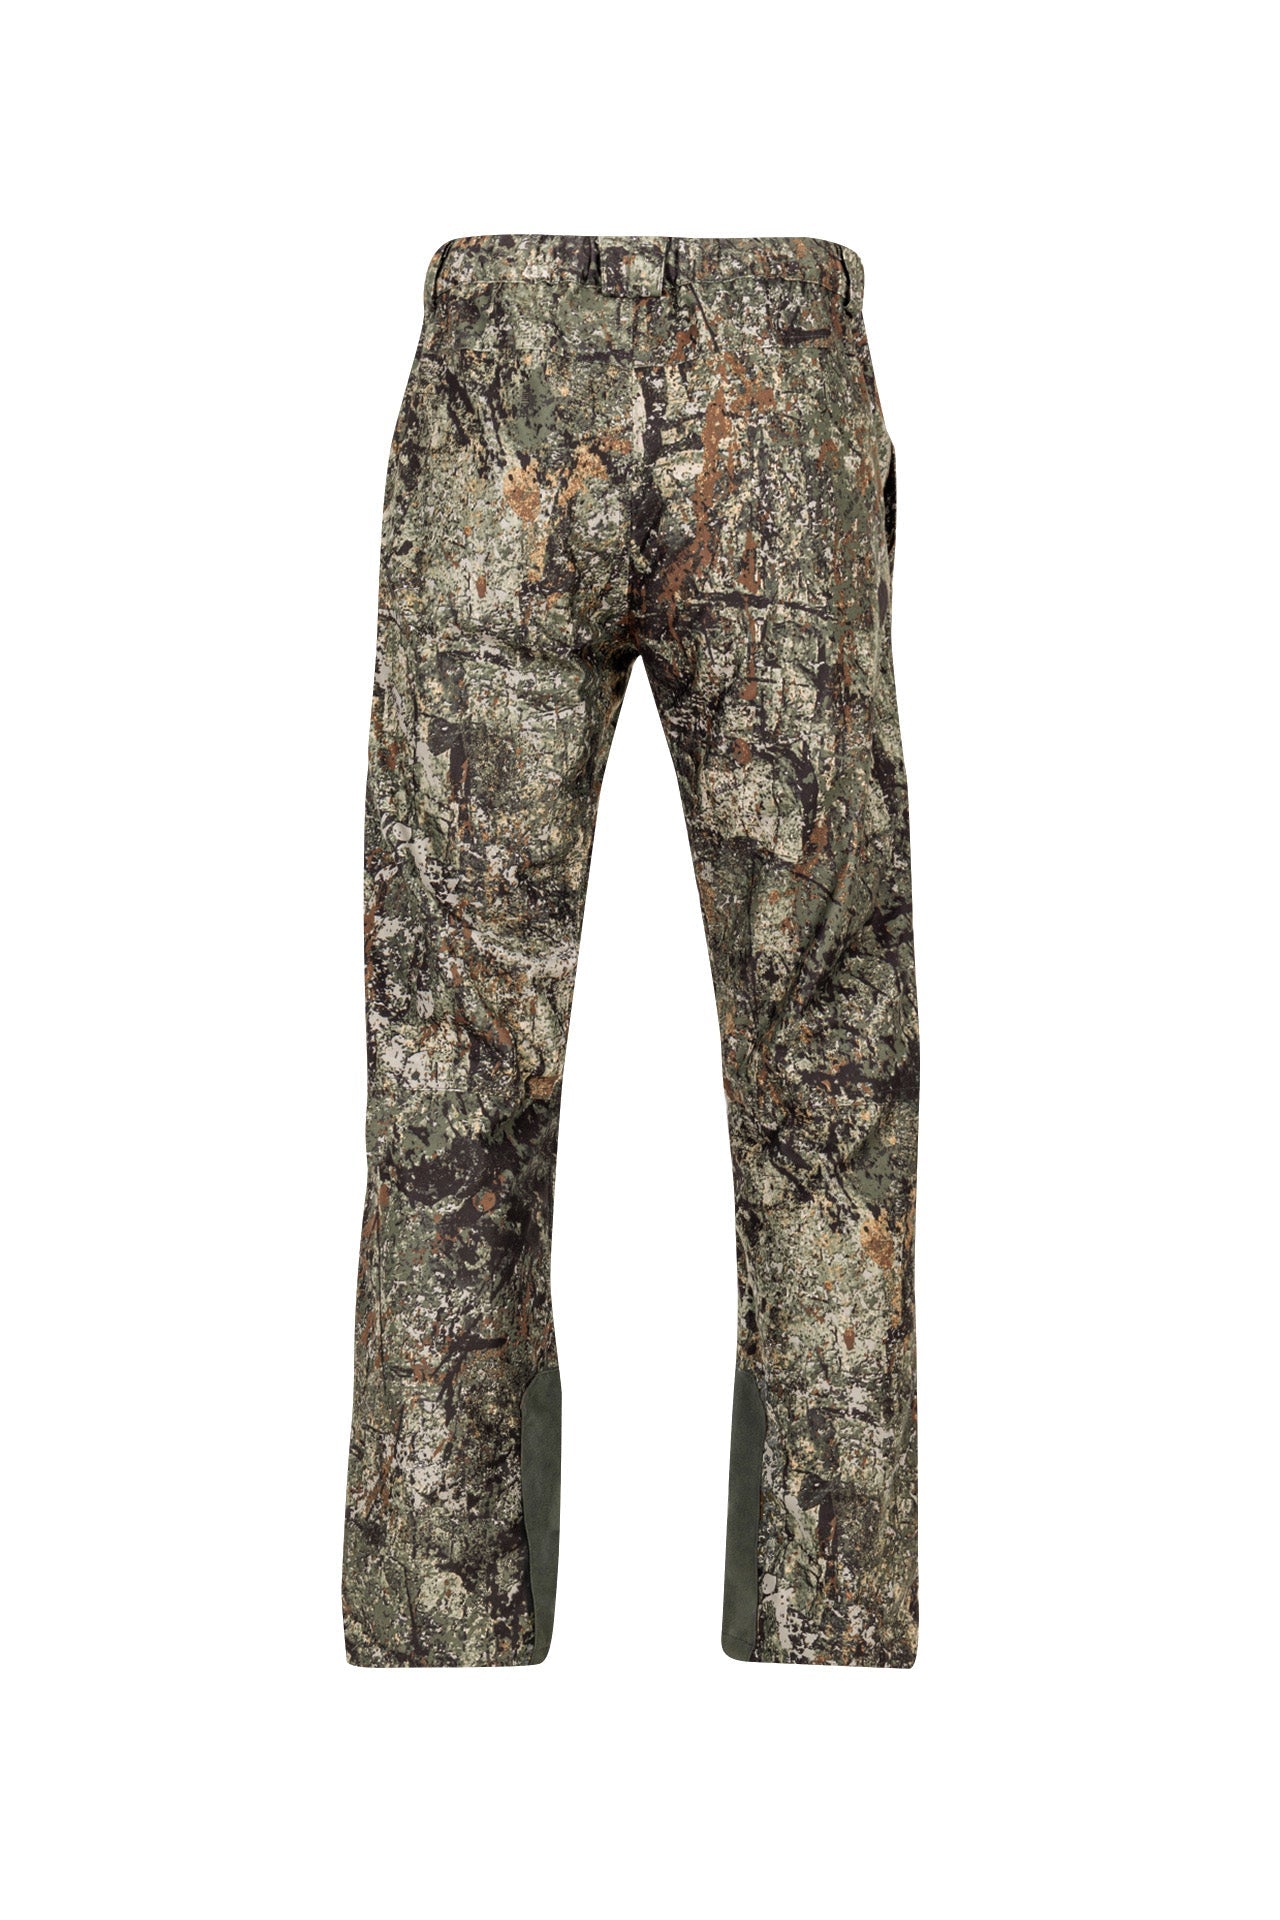 Sportchief Men's "Express 2.0" Hunting Pants